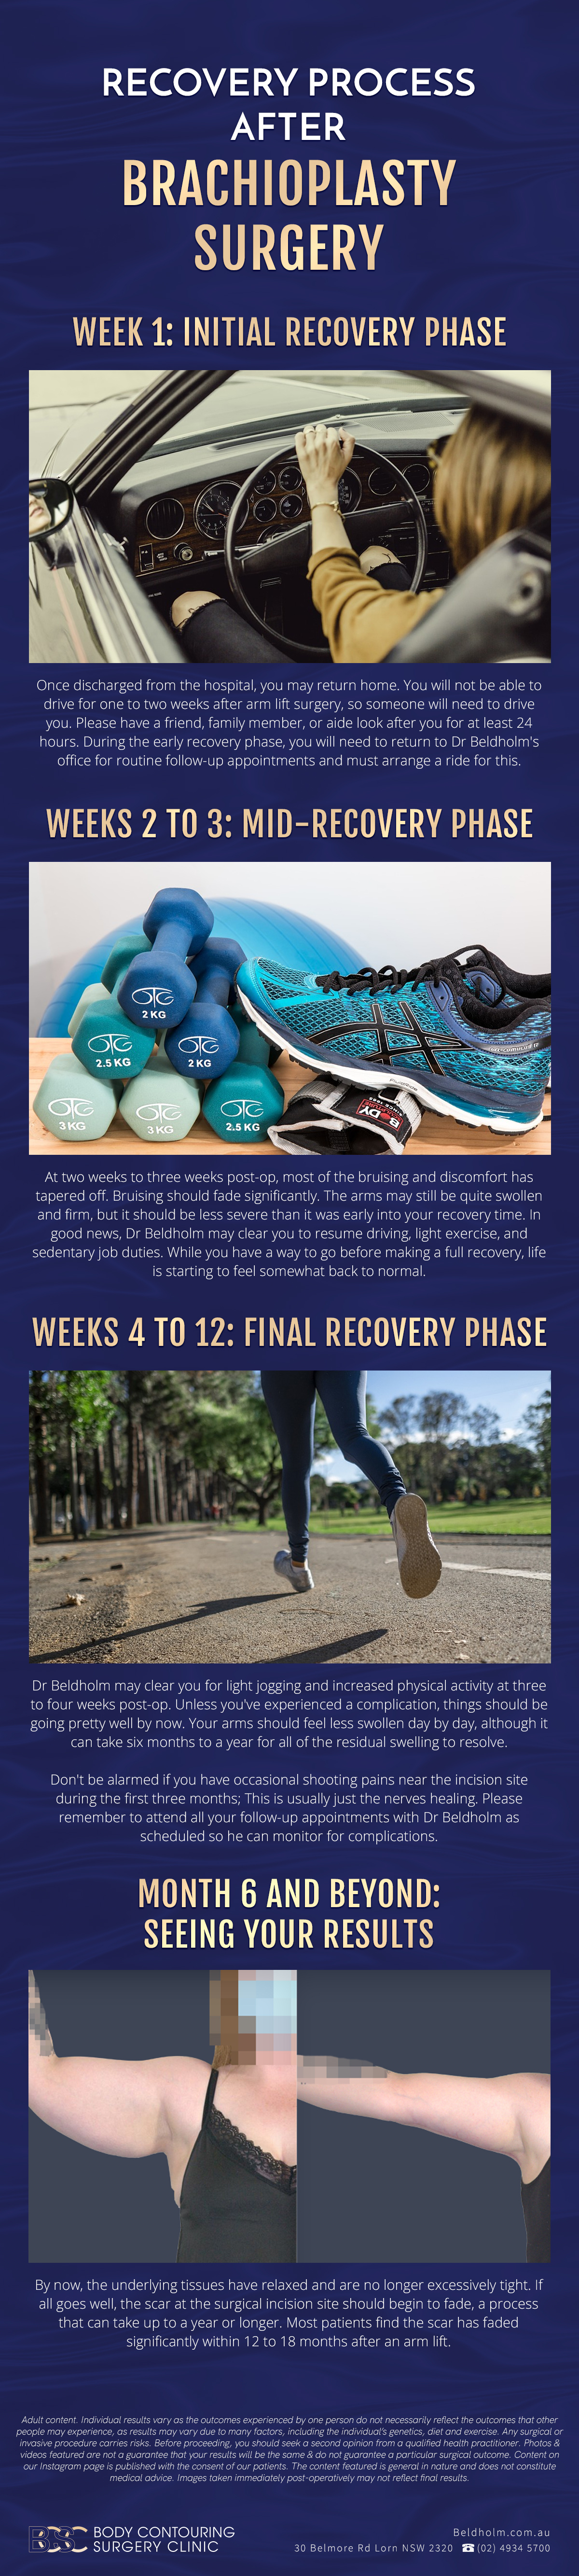 Recovery process after brachioplasty surgery - Infographic